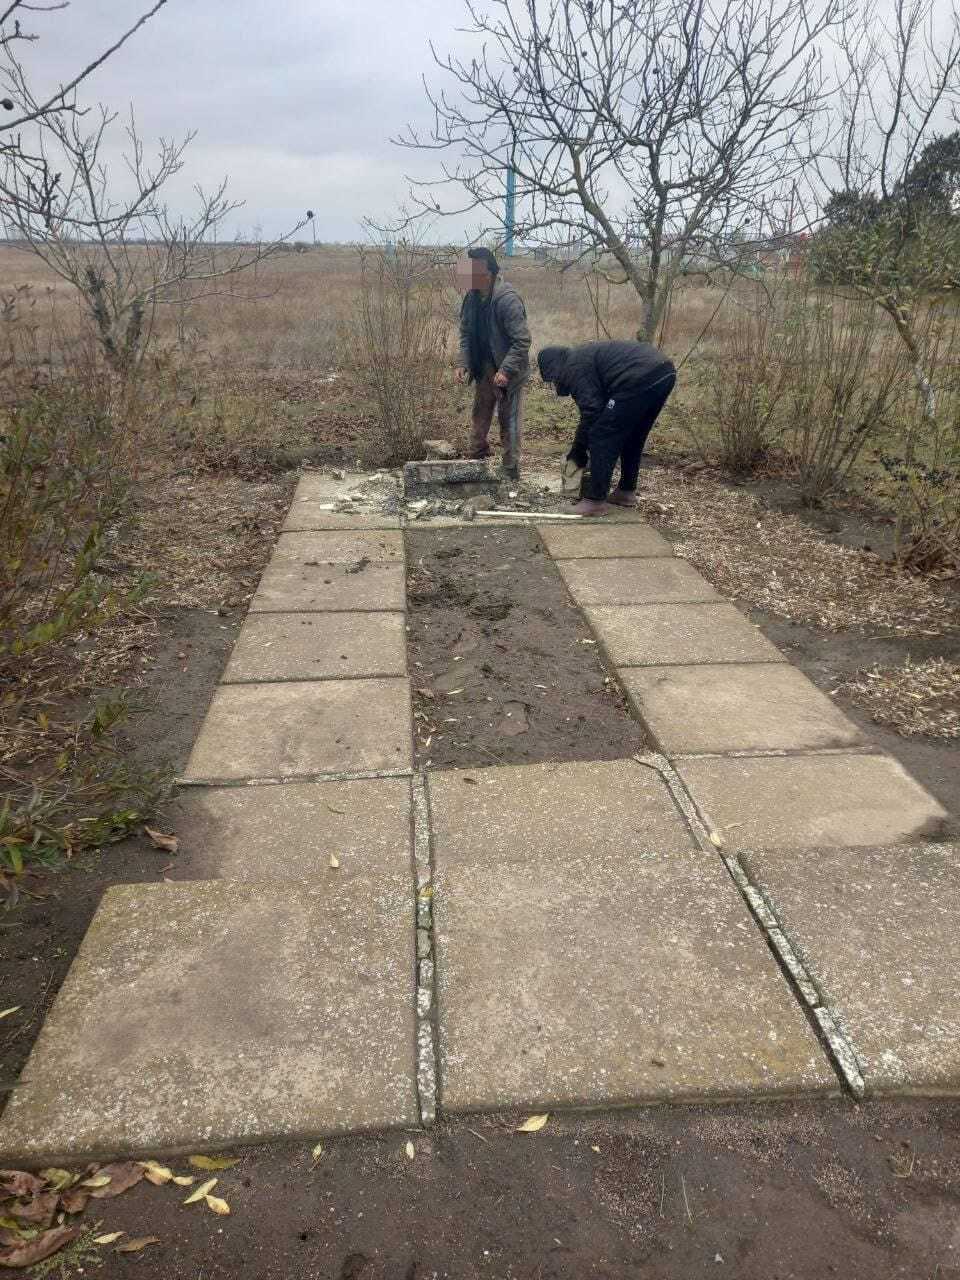 Occupants demolish monuments to Holodomor victims in Kherson region. Photo facts